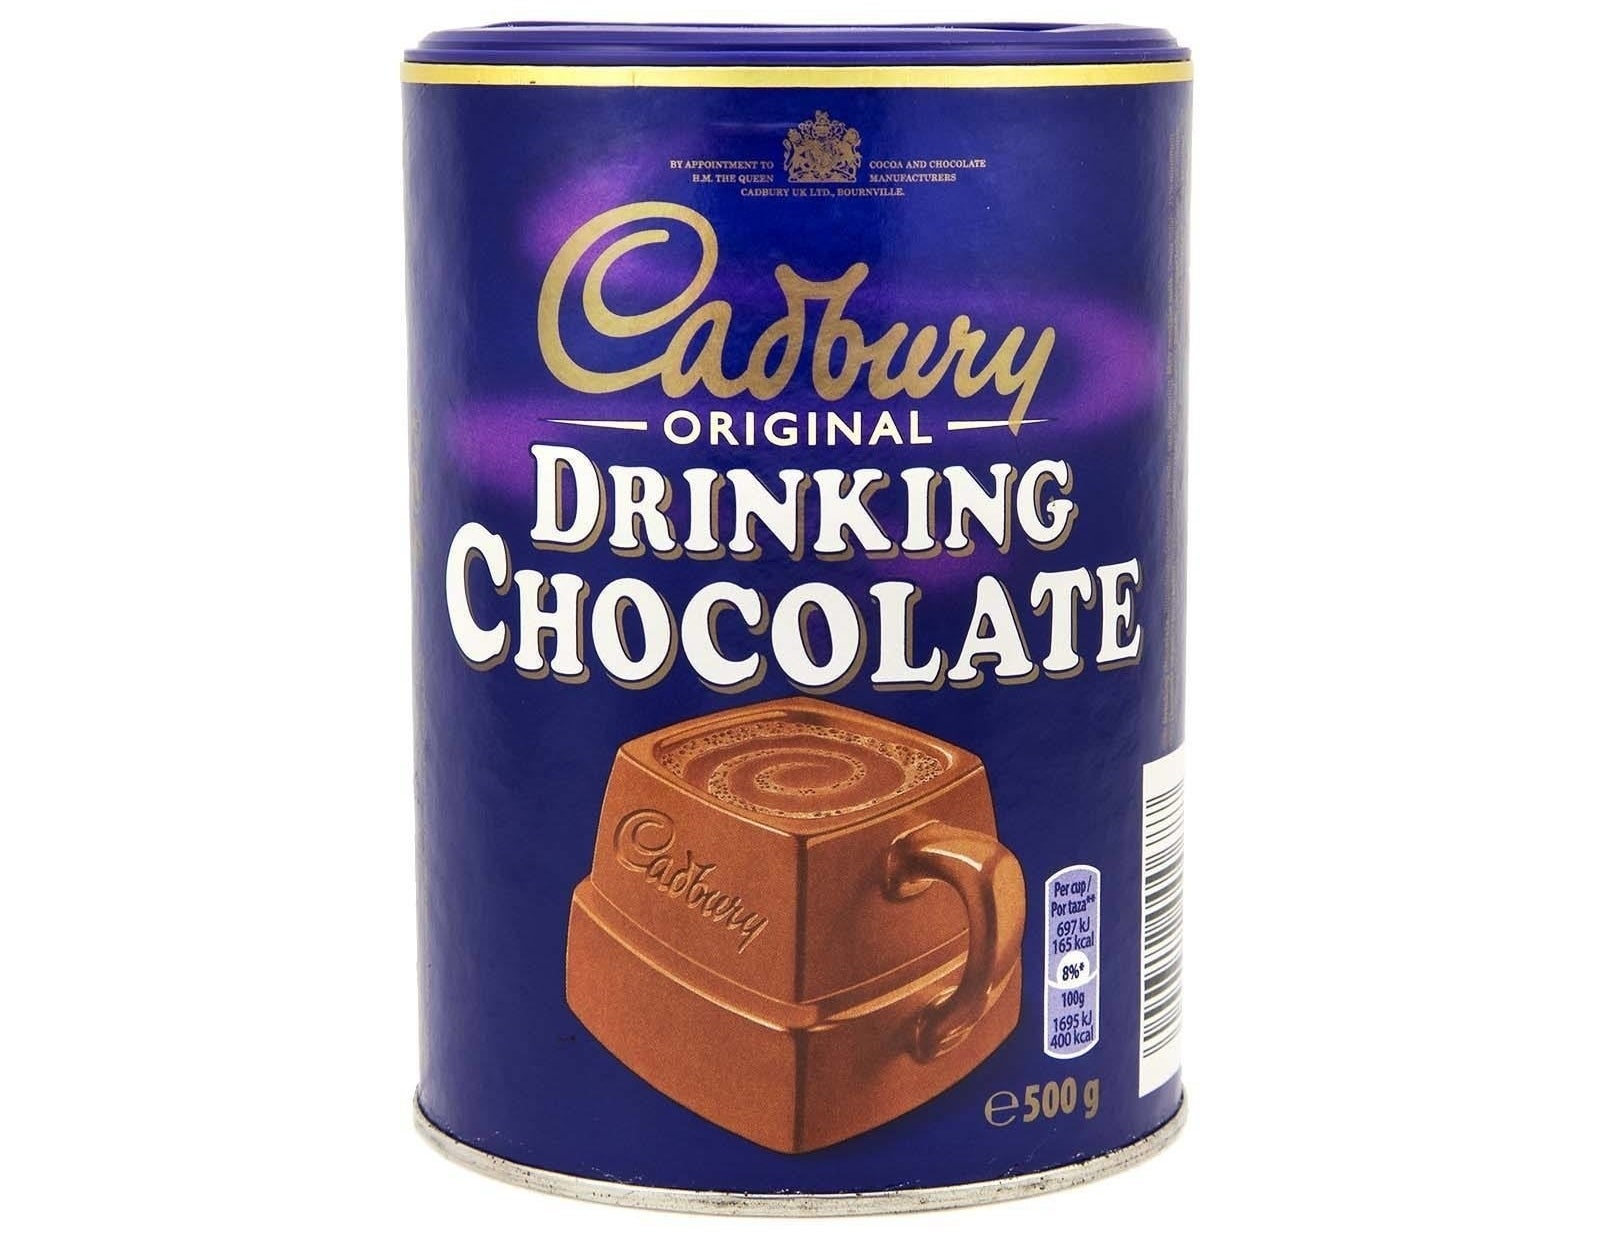 The canister of drinking chocolate